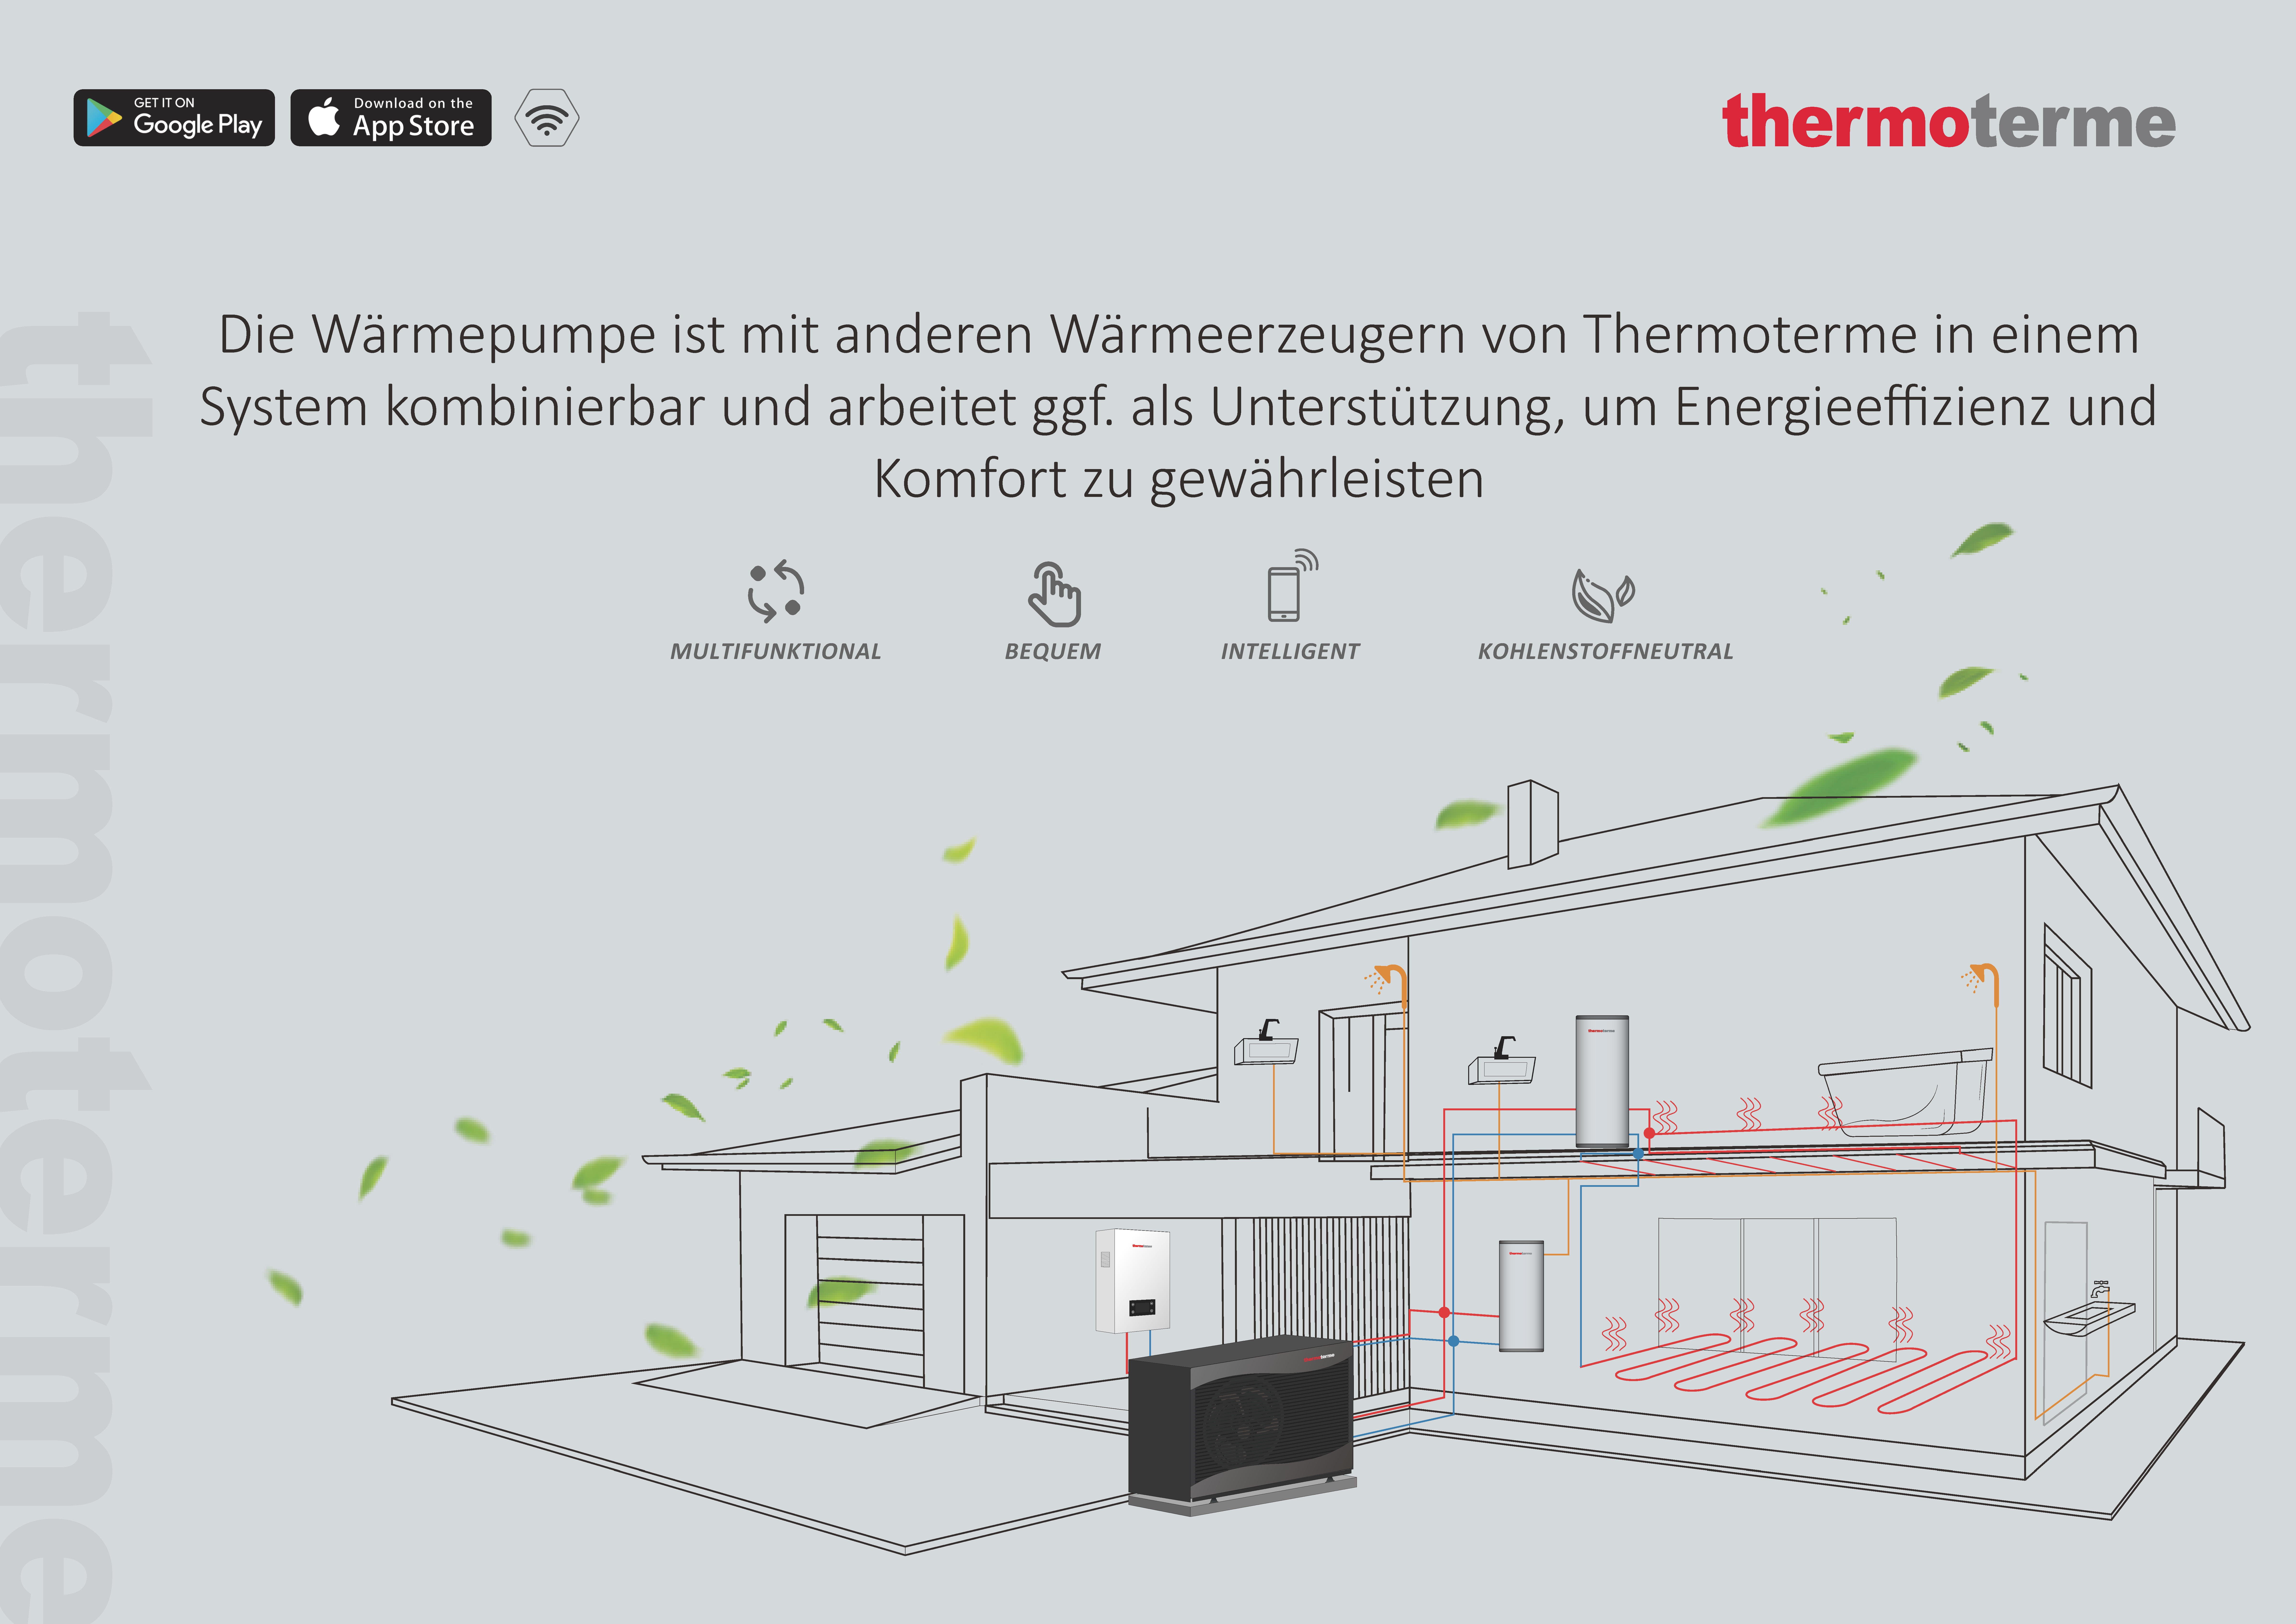 thermoterme网站配图.png